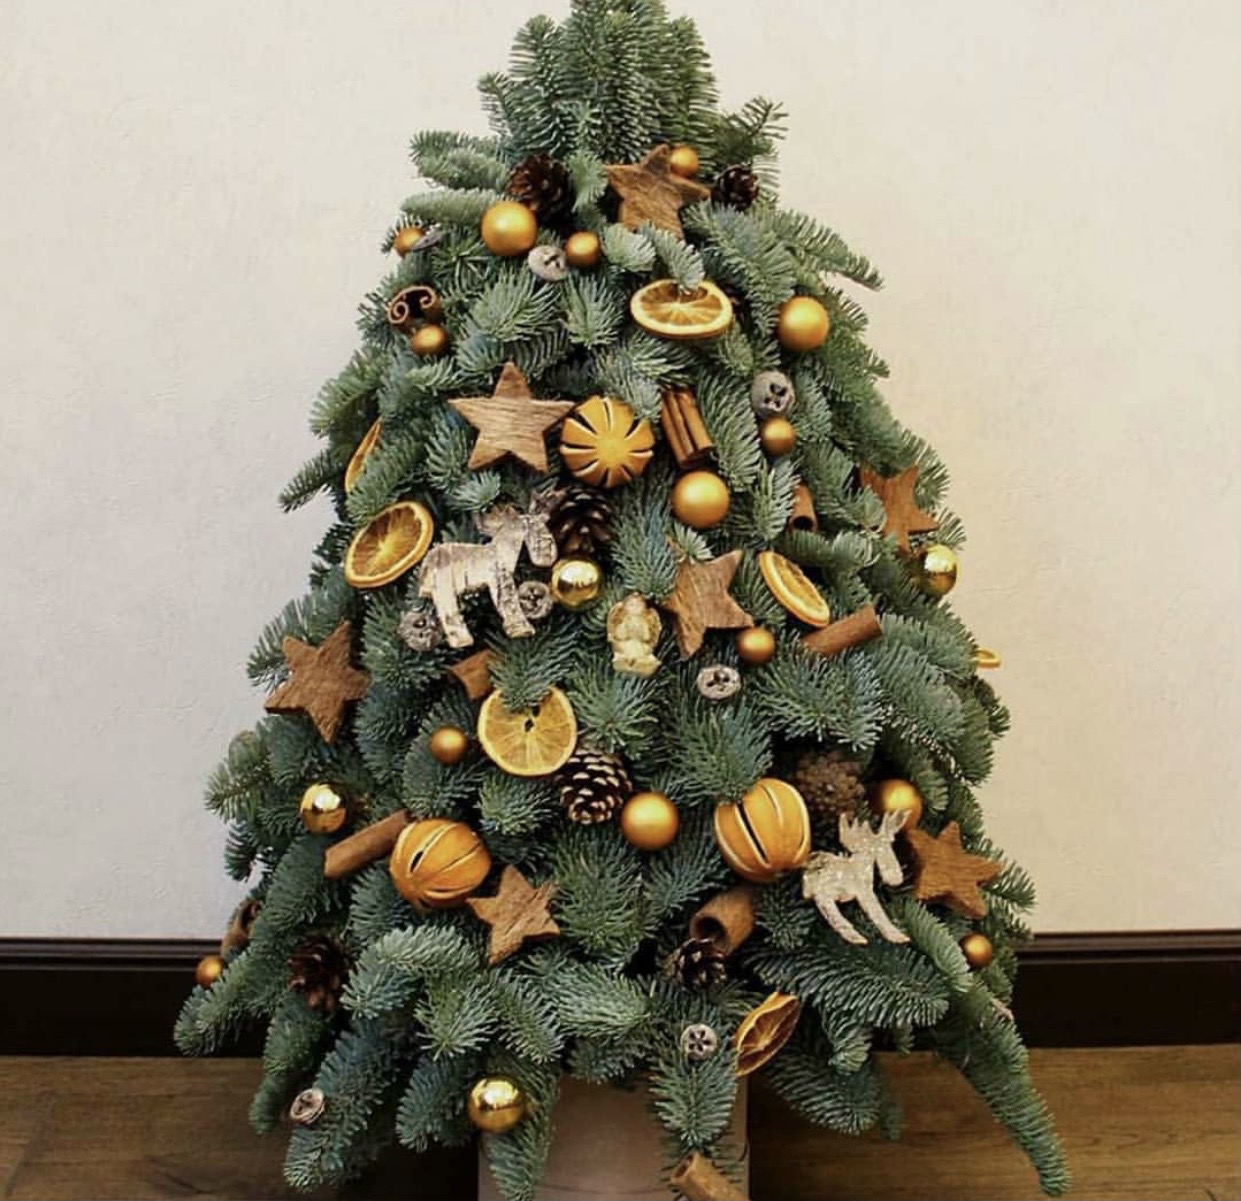 The cutest Tangy winter theme tree - Slaylebrity